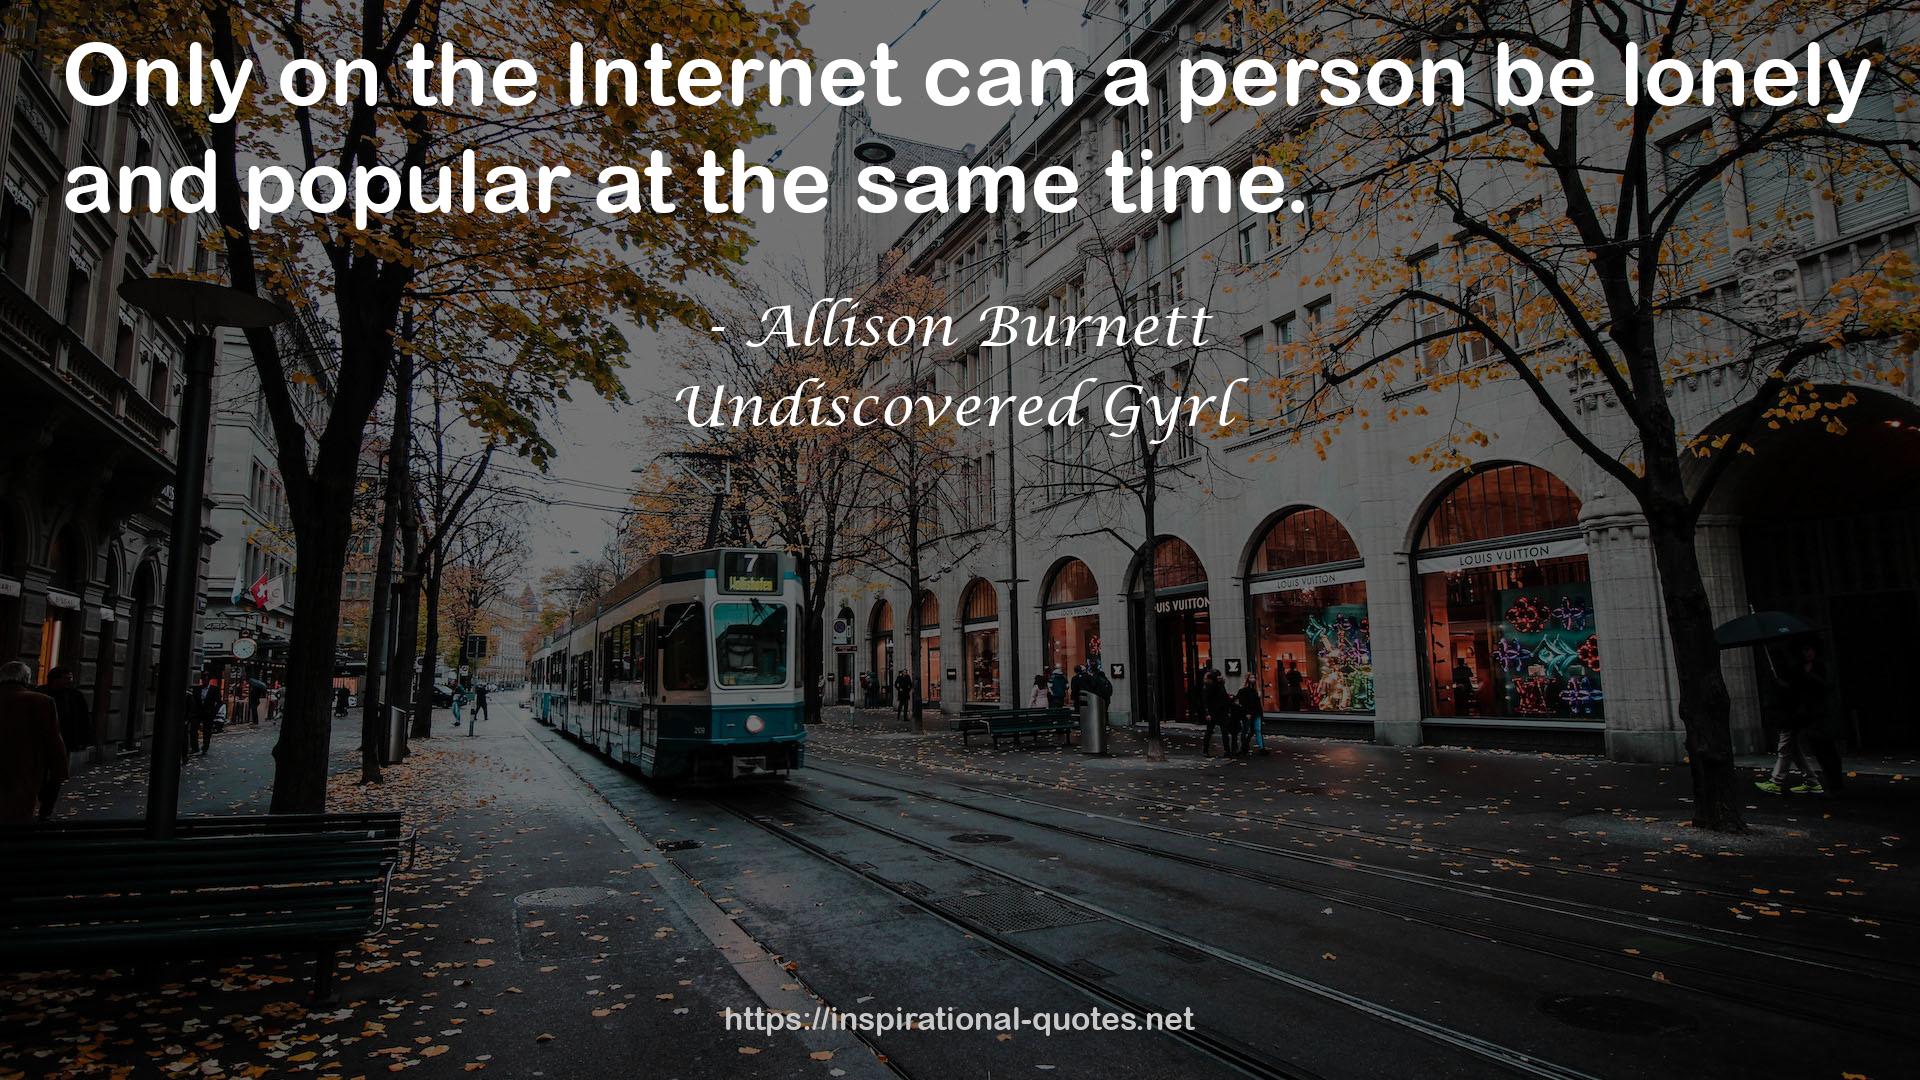 Undiscovered Gyrl QUOTES